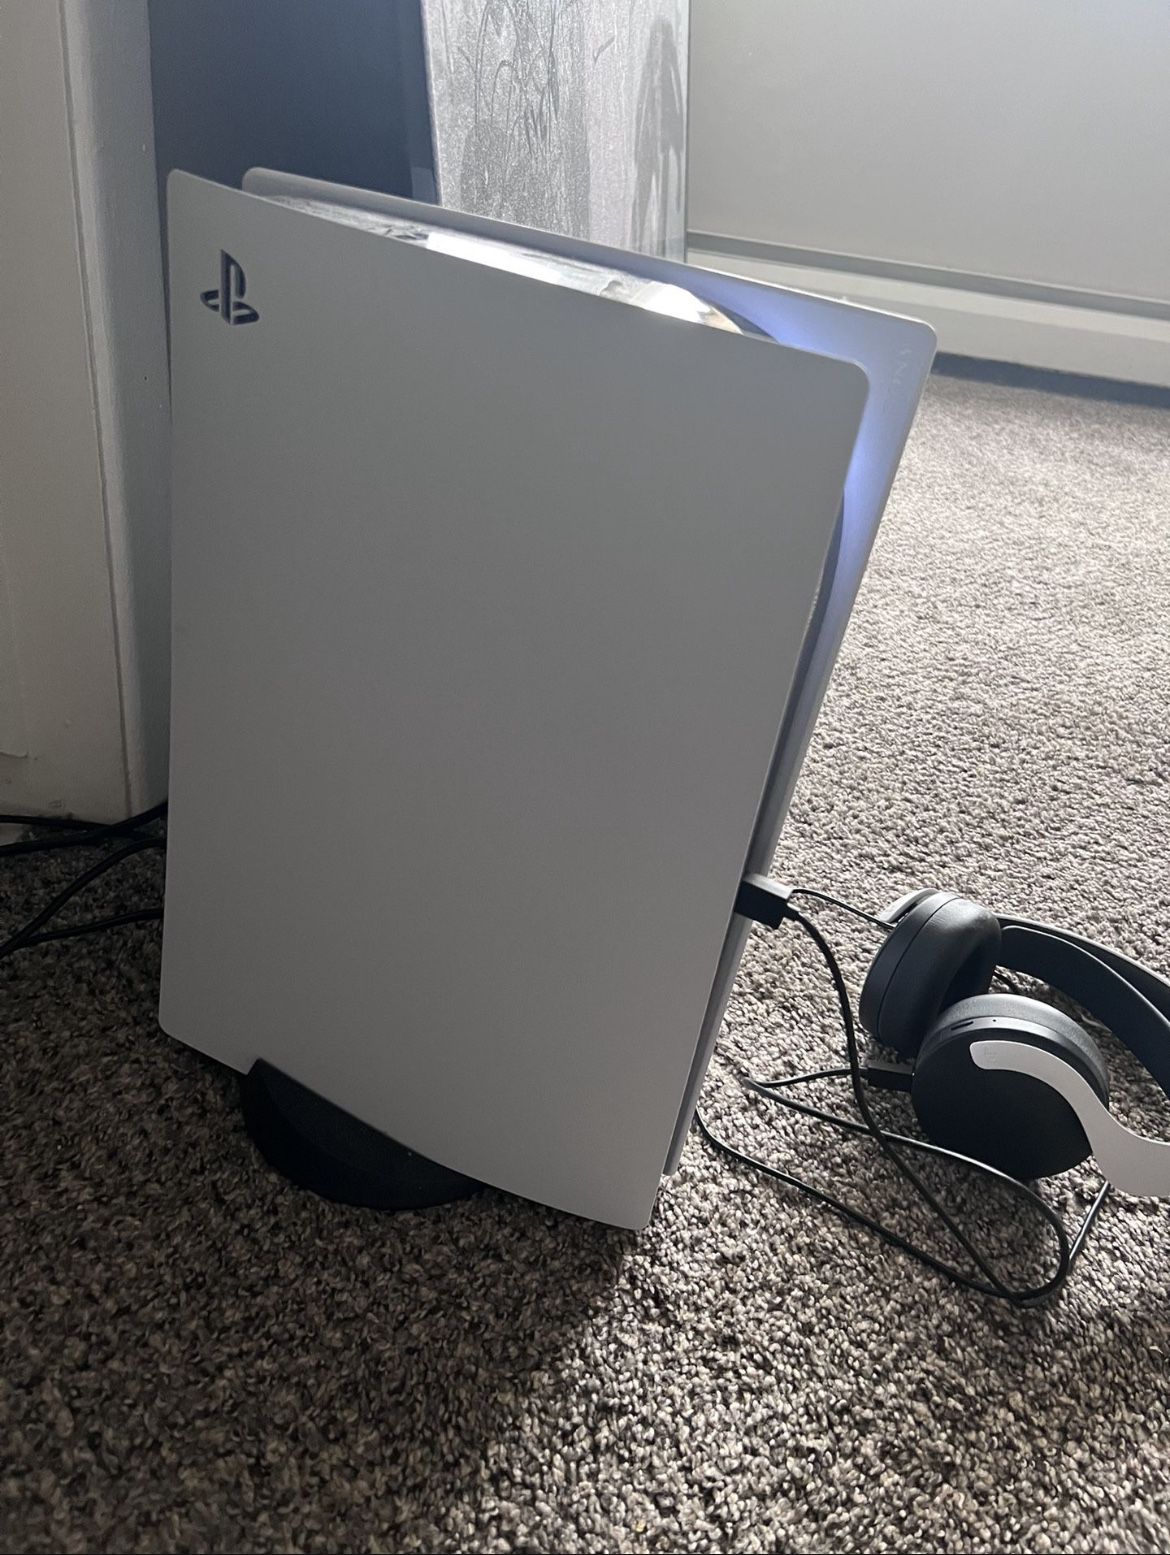 Ps5 And Bluetooth Headset